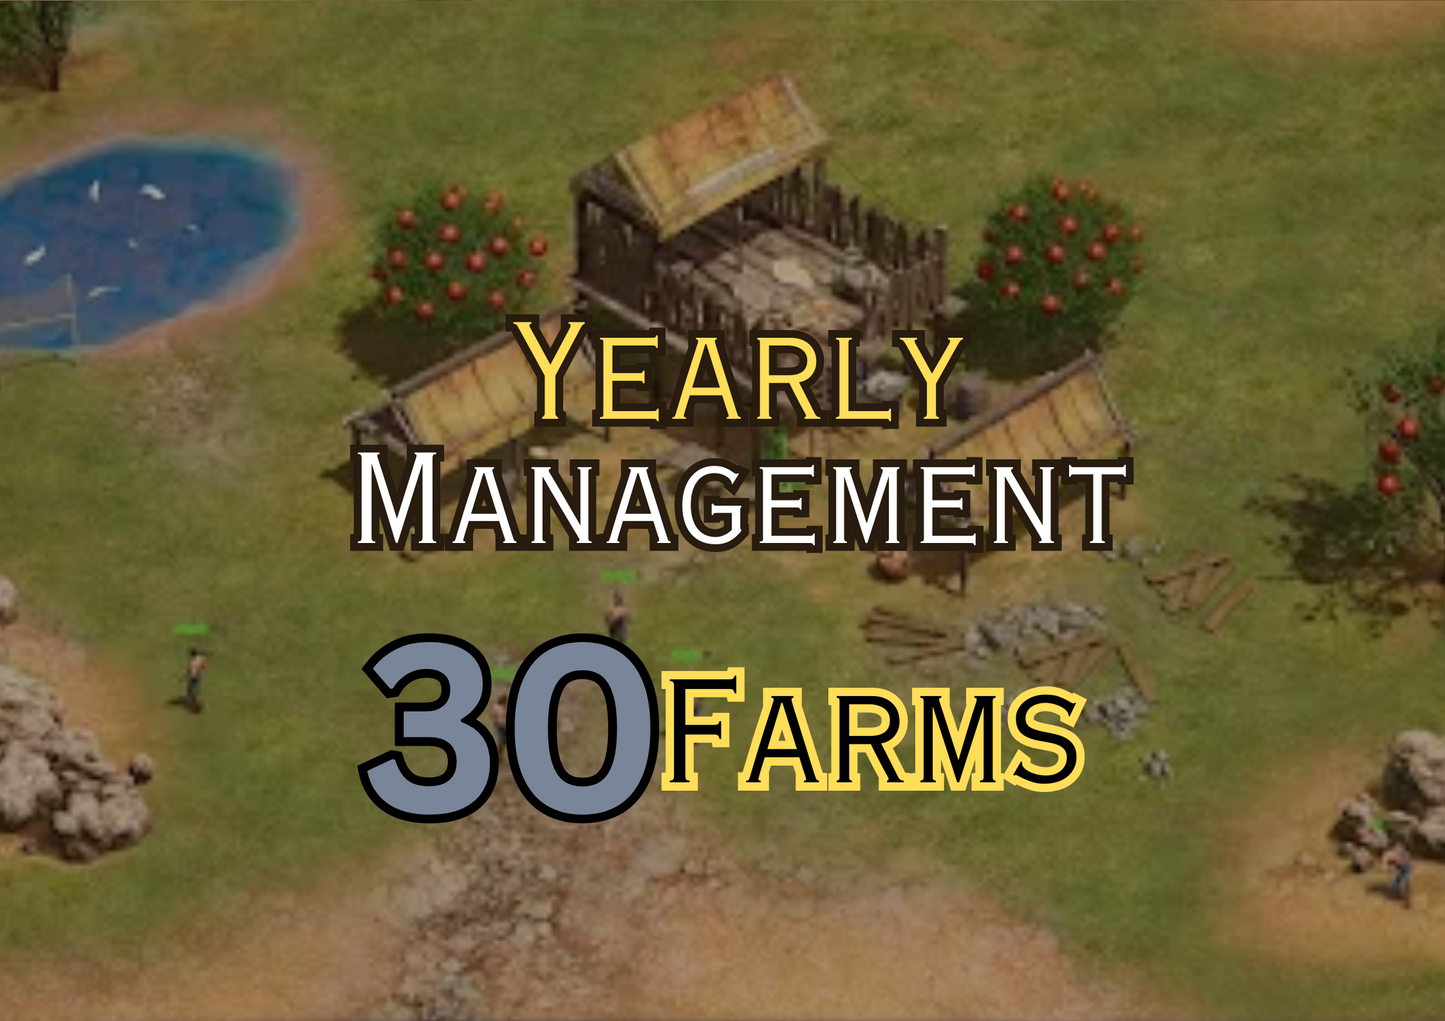 Yearly Management for 30 farms